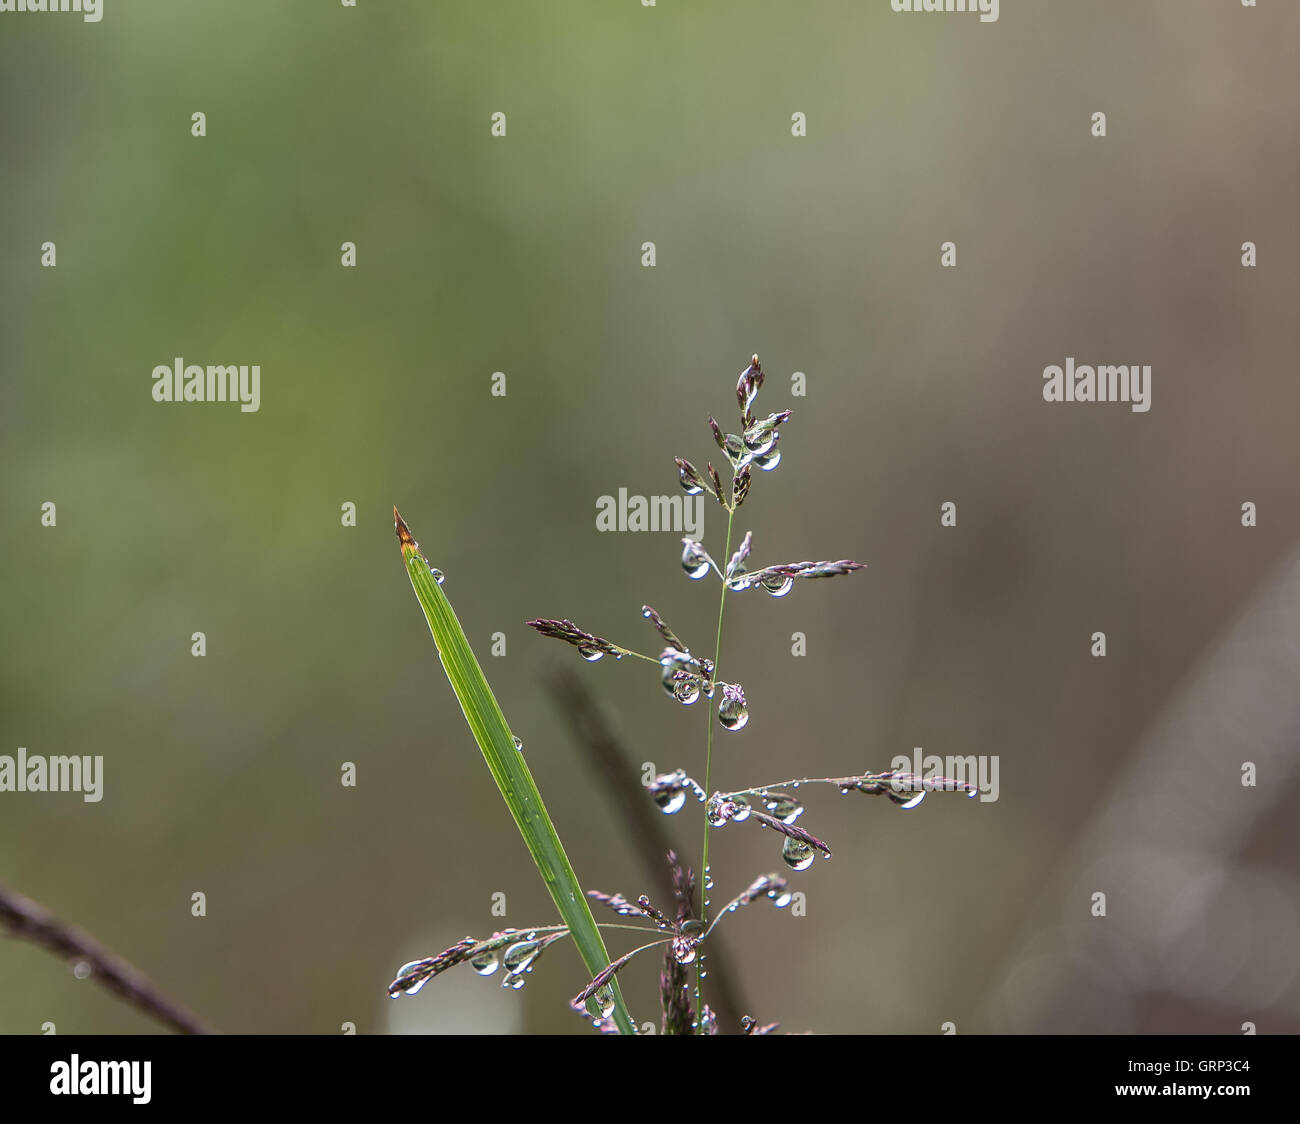 Top of a field plant and a blade of grass covered in morning dew droplets. Stock Photo